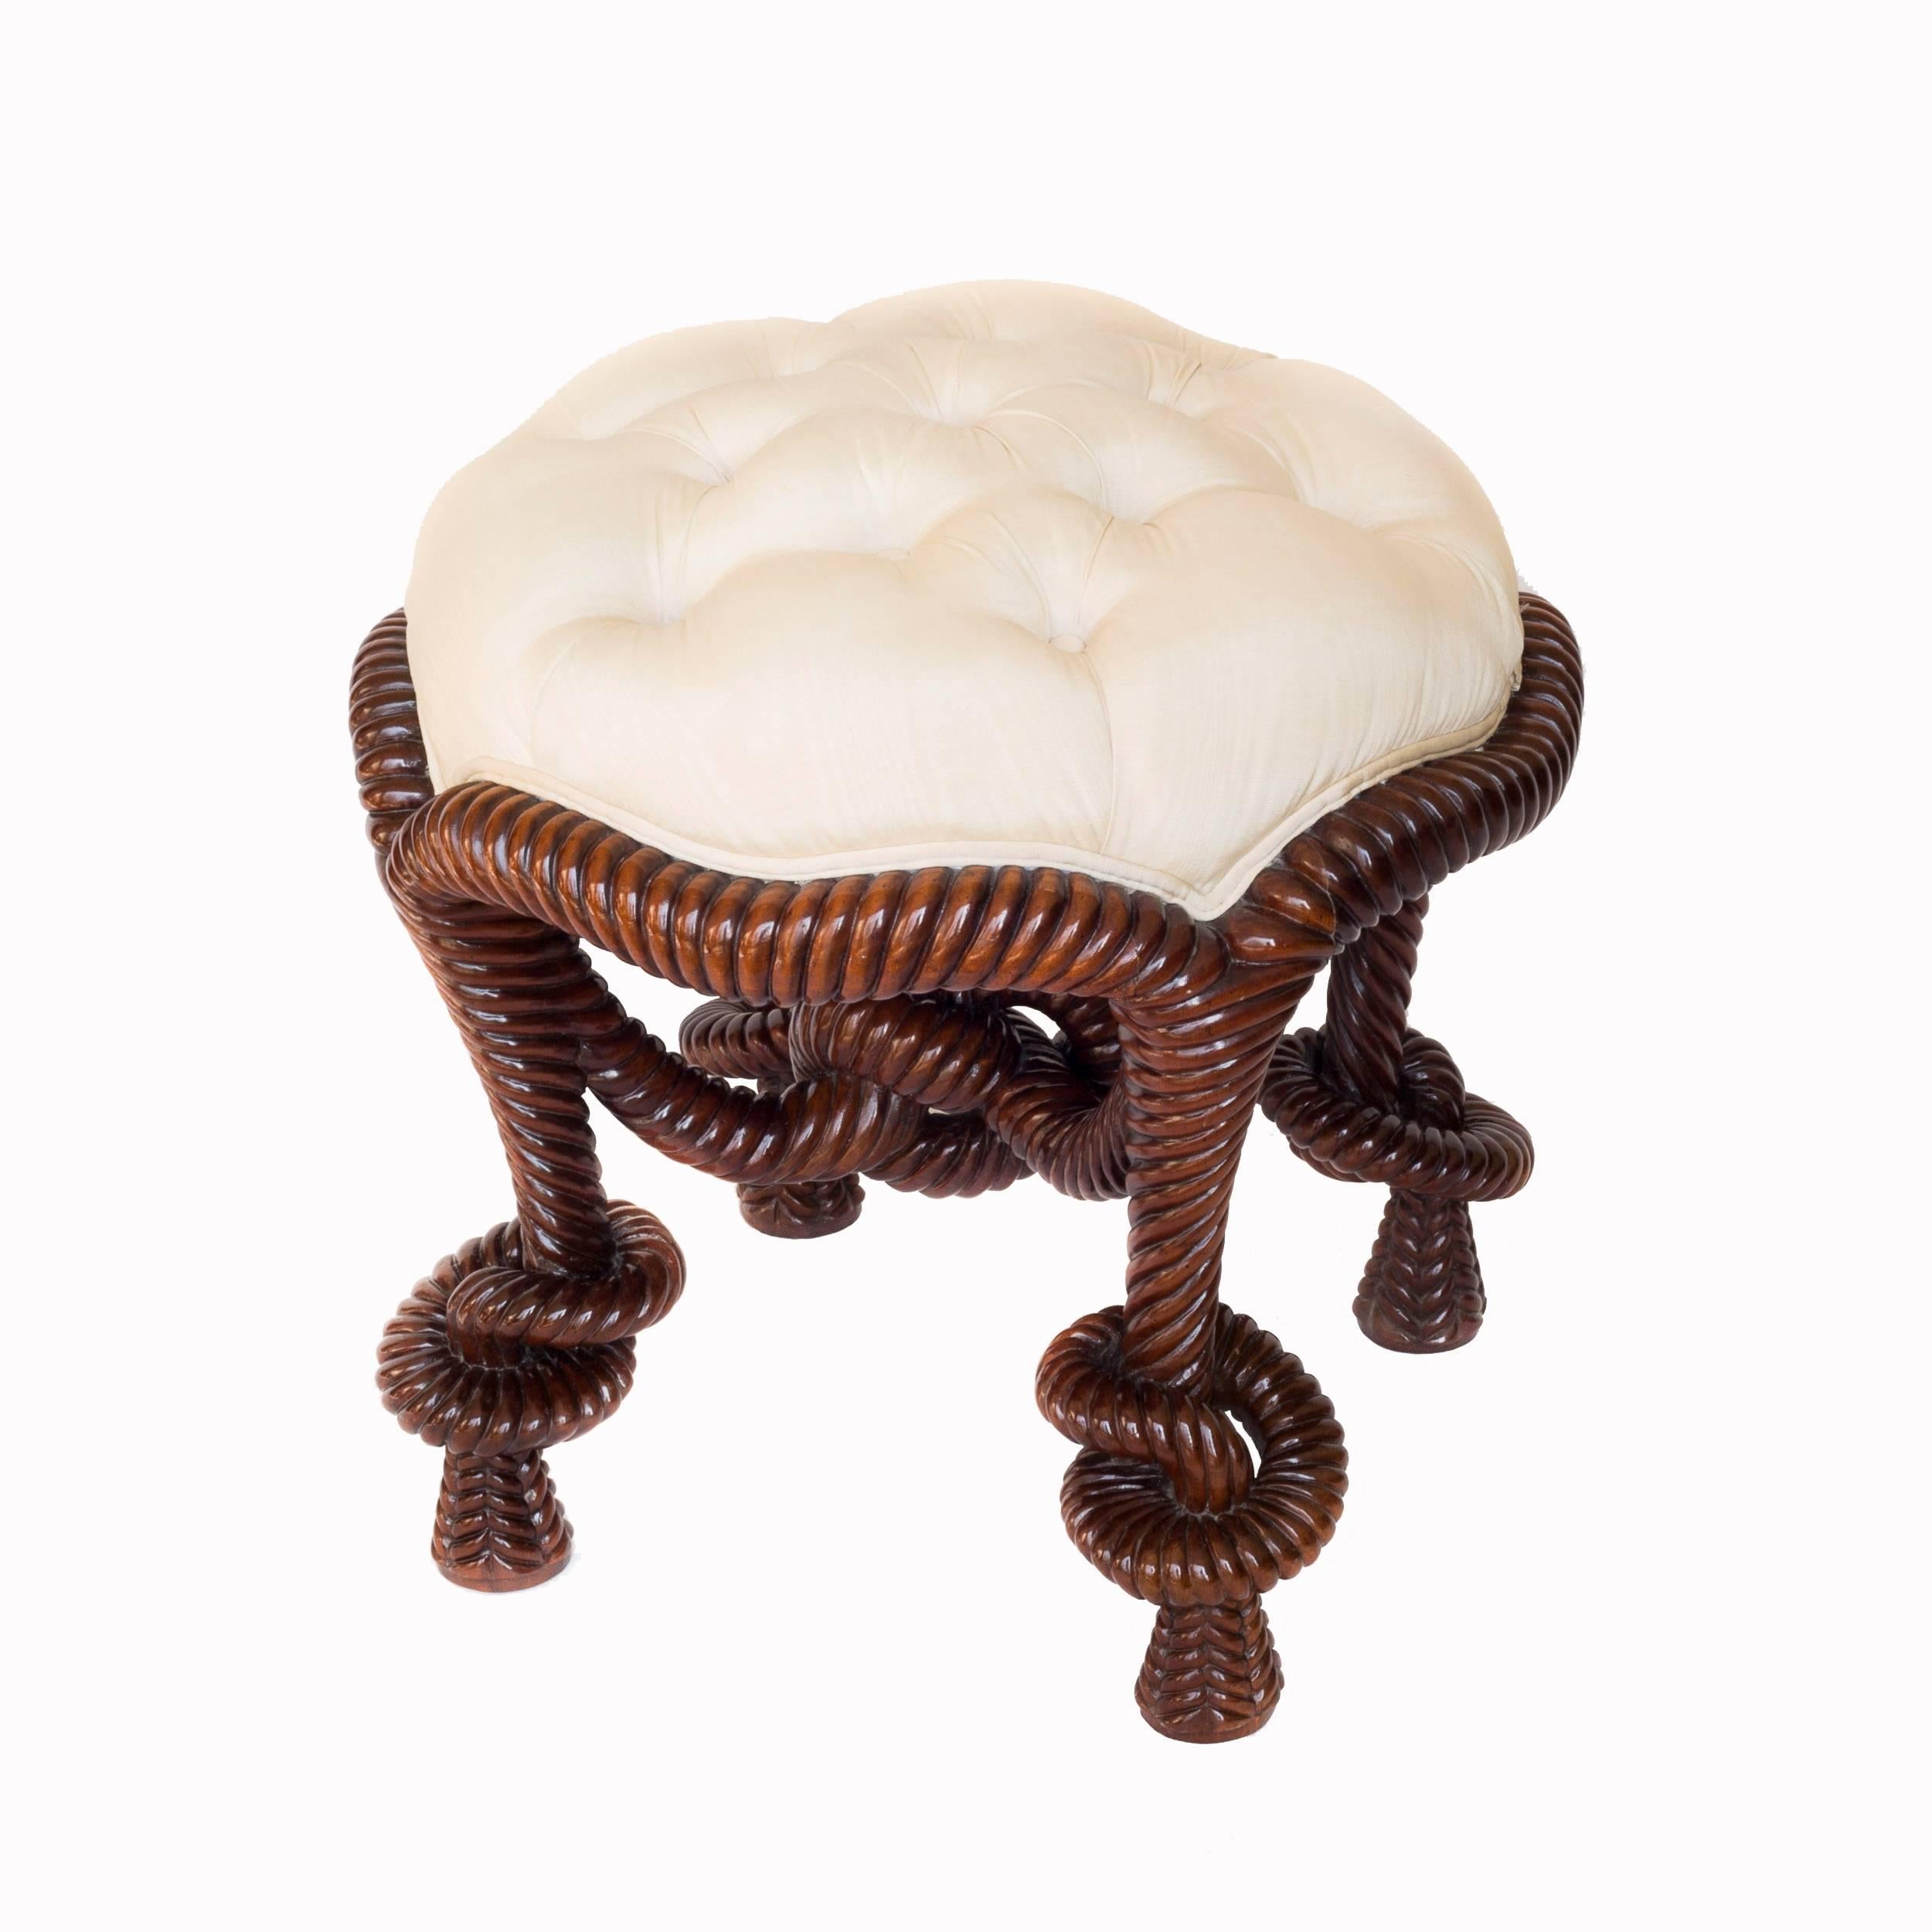 Rococo Revival French Napoleon III Style Rope-Twist Dressing Stool